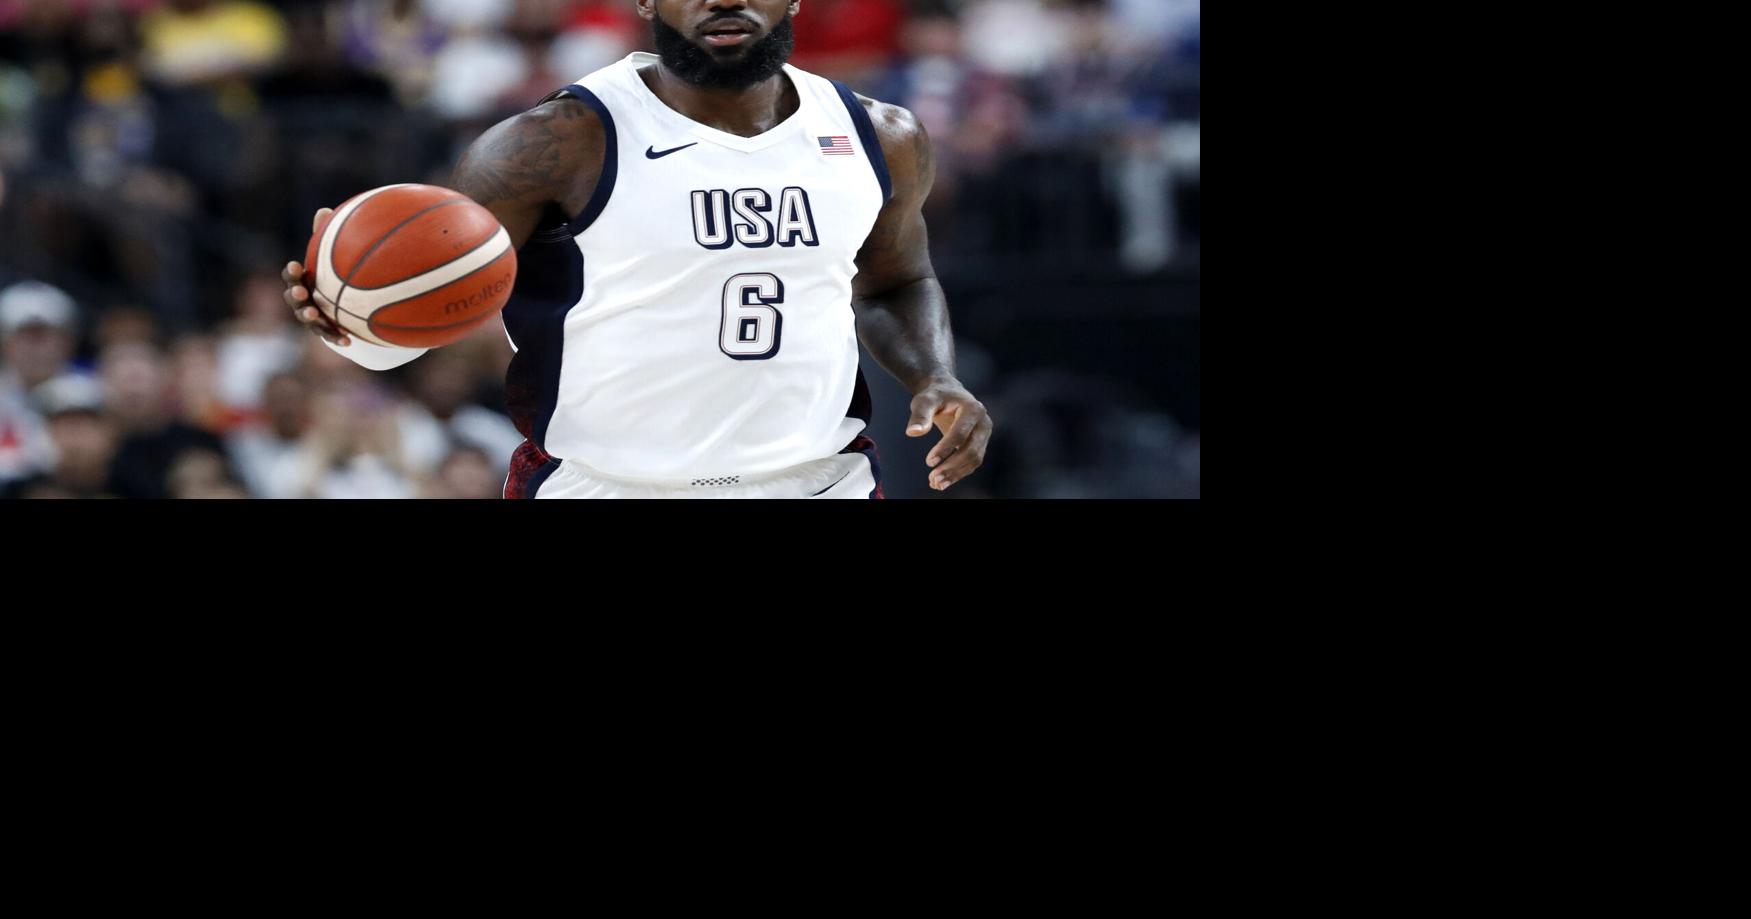 USA emerges as favourite | Sports